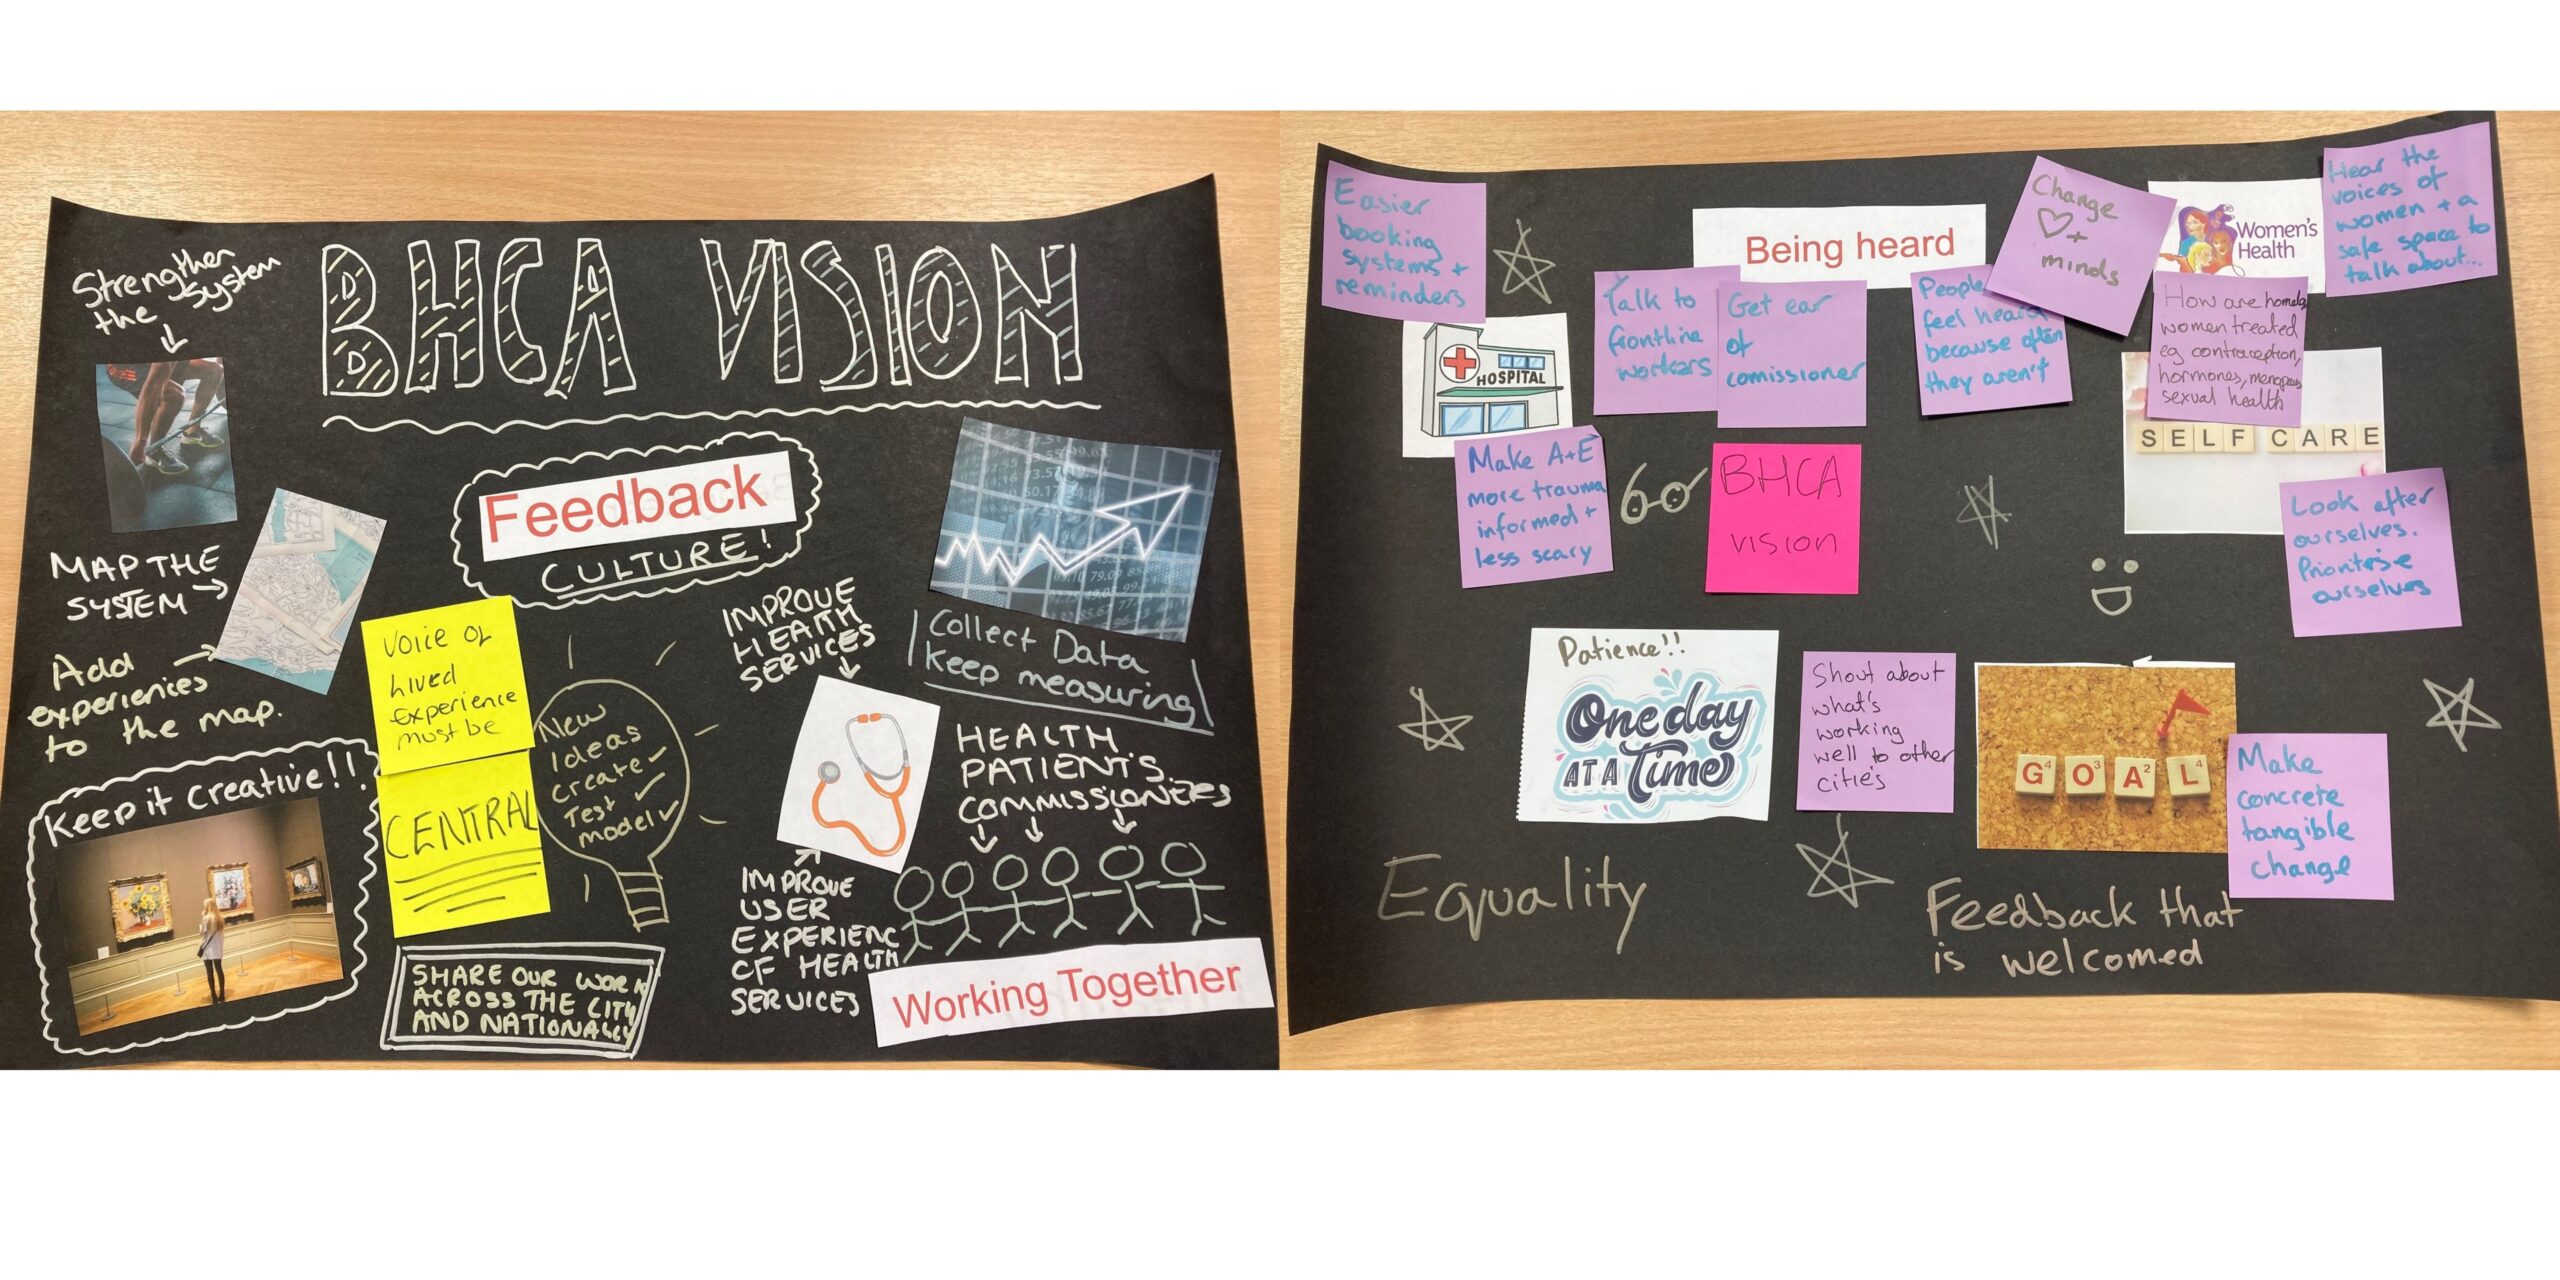 BHCA project vision boards